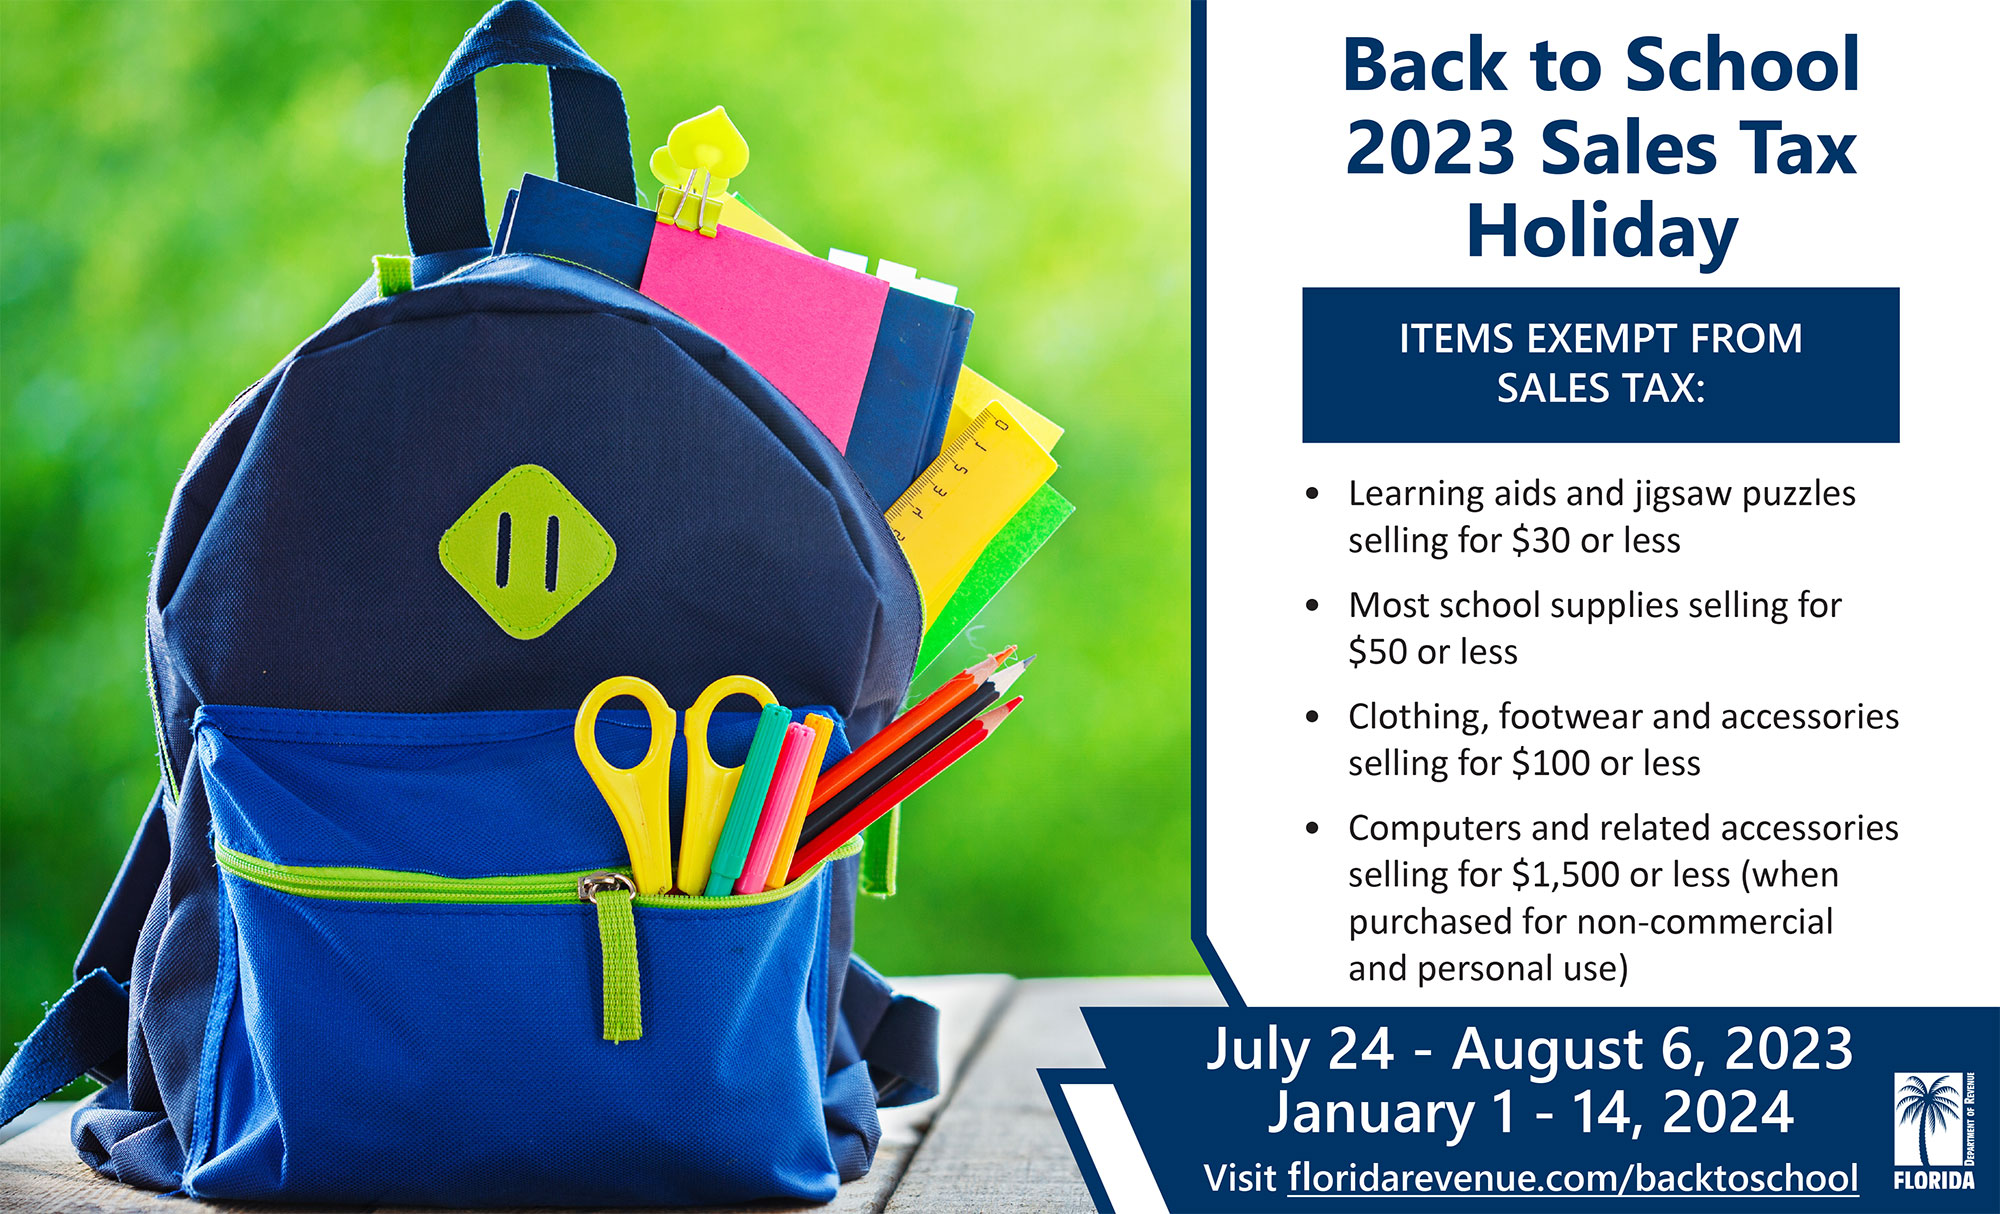 Back to School 2023 Sales Tax Holiday